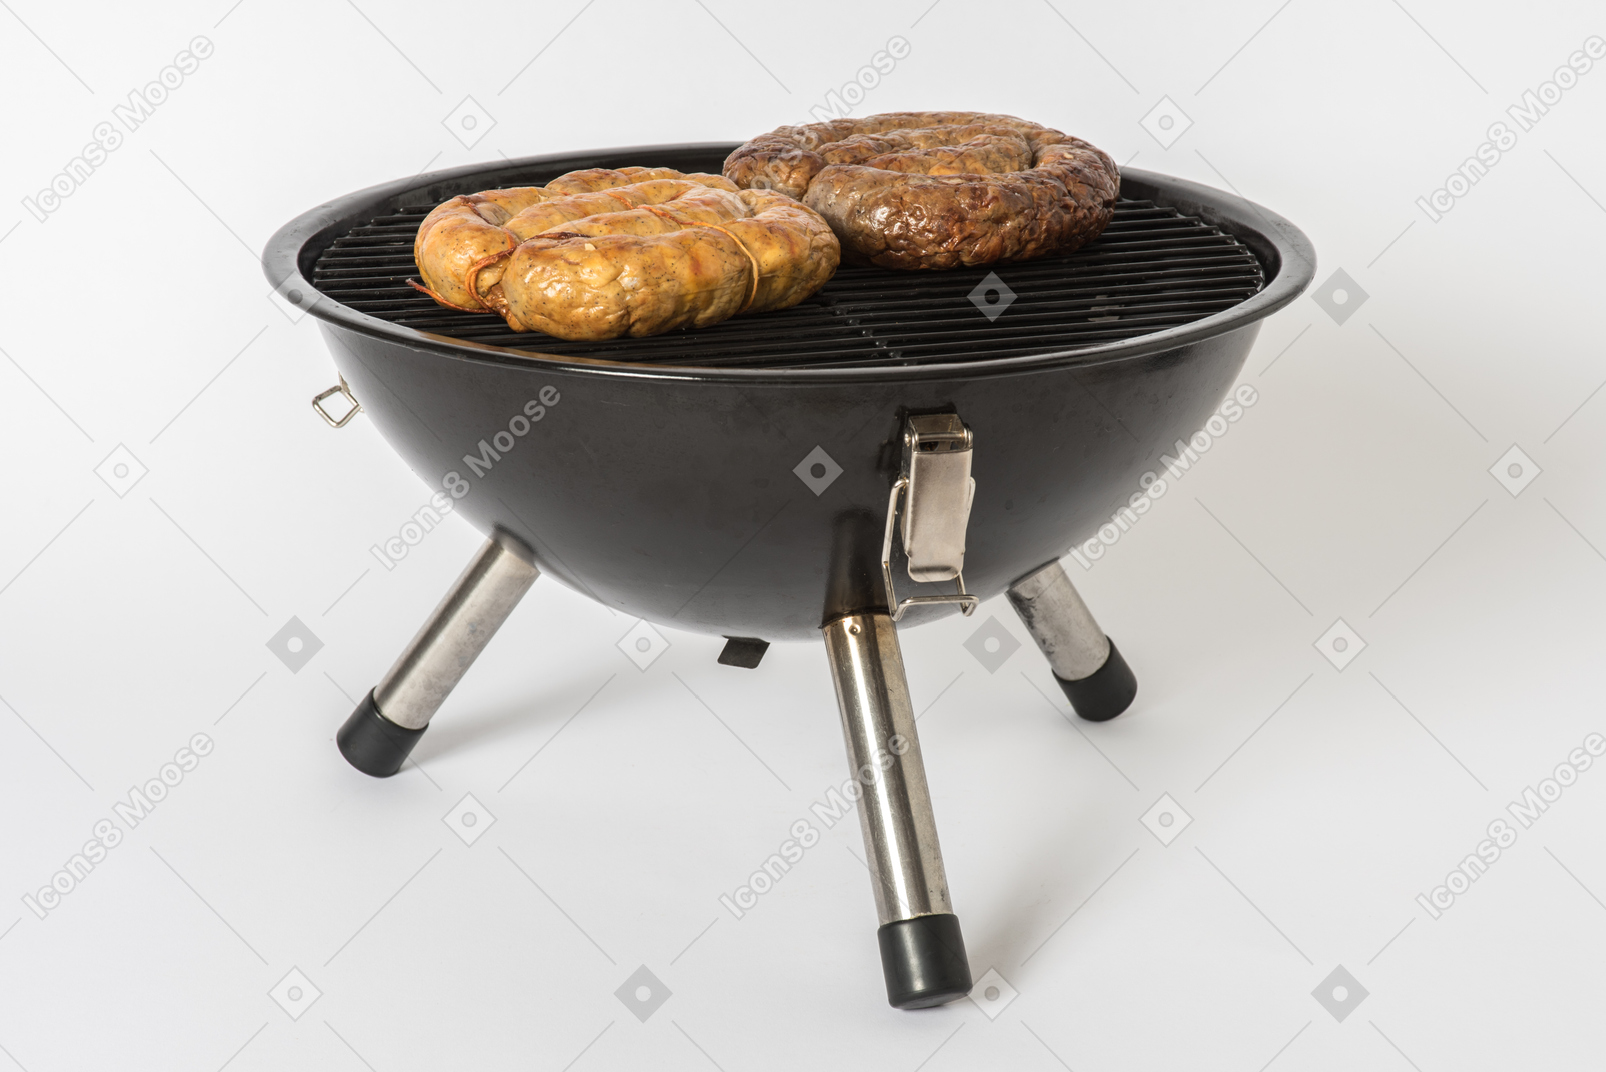 Two sausages on grill